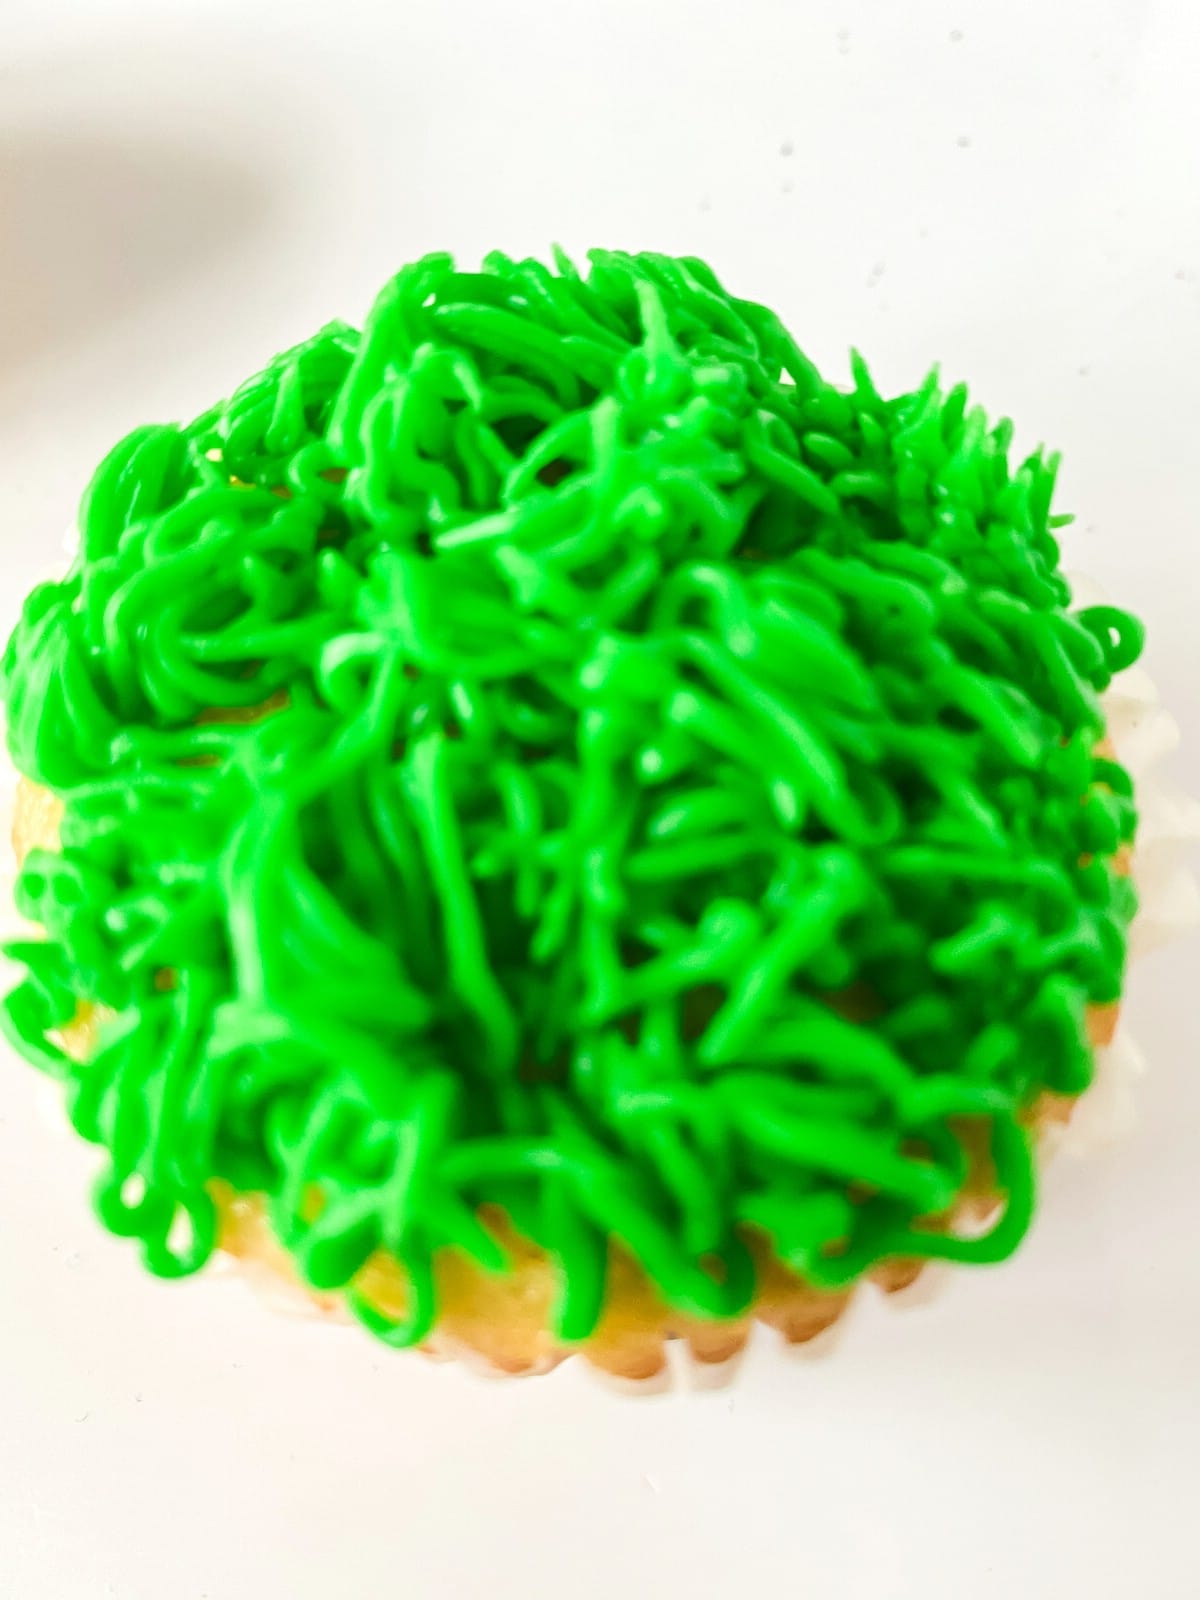 A cupcake topped with green icing like grass